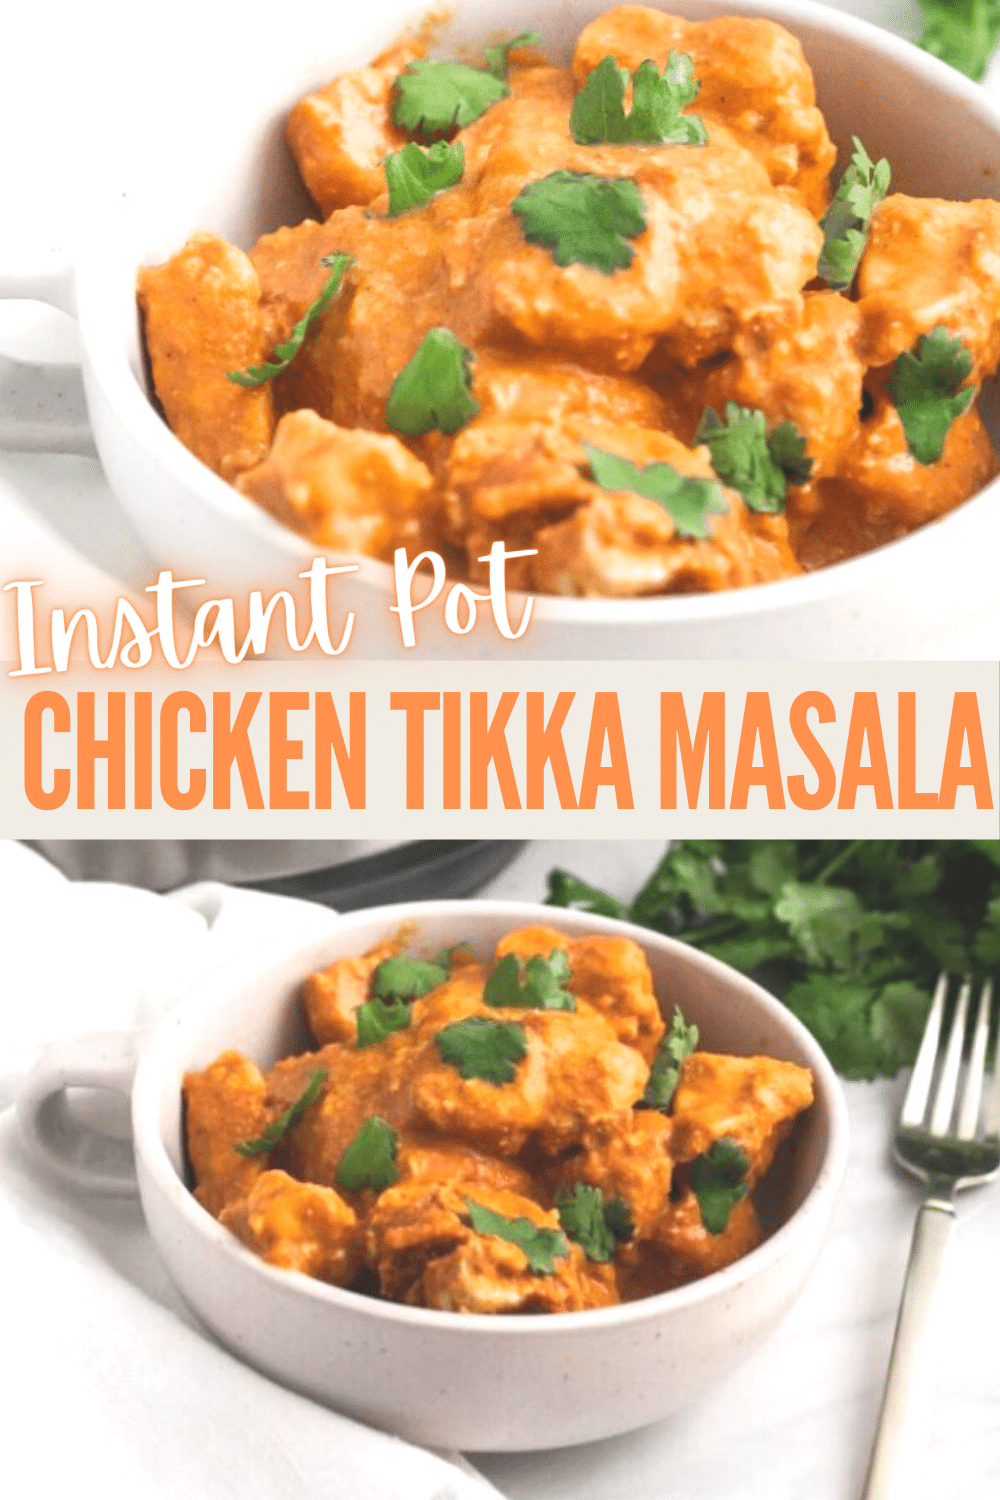 Instant pot Chicken Tikka Masala is a rich, spicy, and creamy Indian recipe of boneless chicken! Tasting as good as the dish served in restaurants, you'll be licking your fingers and going back for seconds! via @wondermomwannab